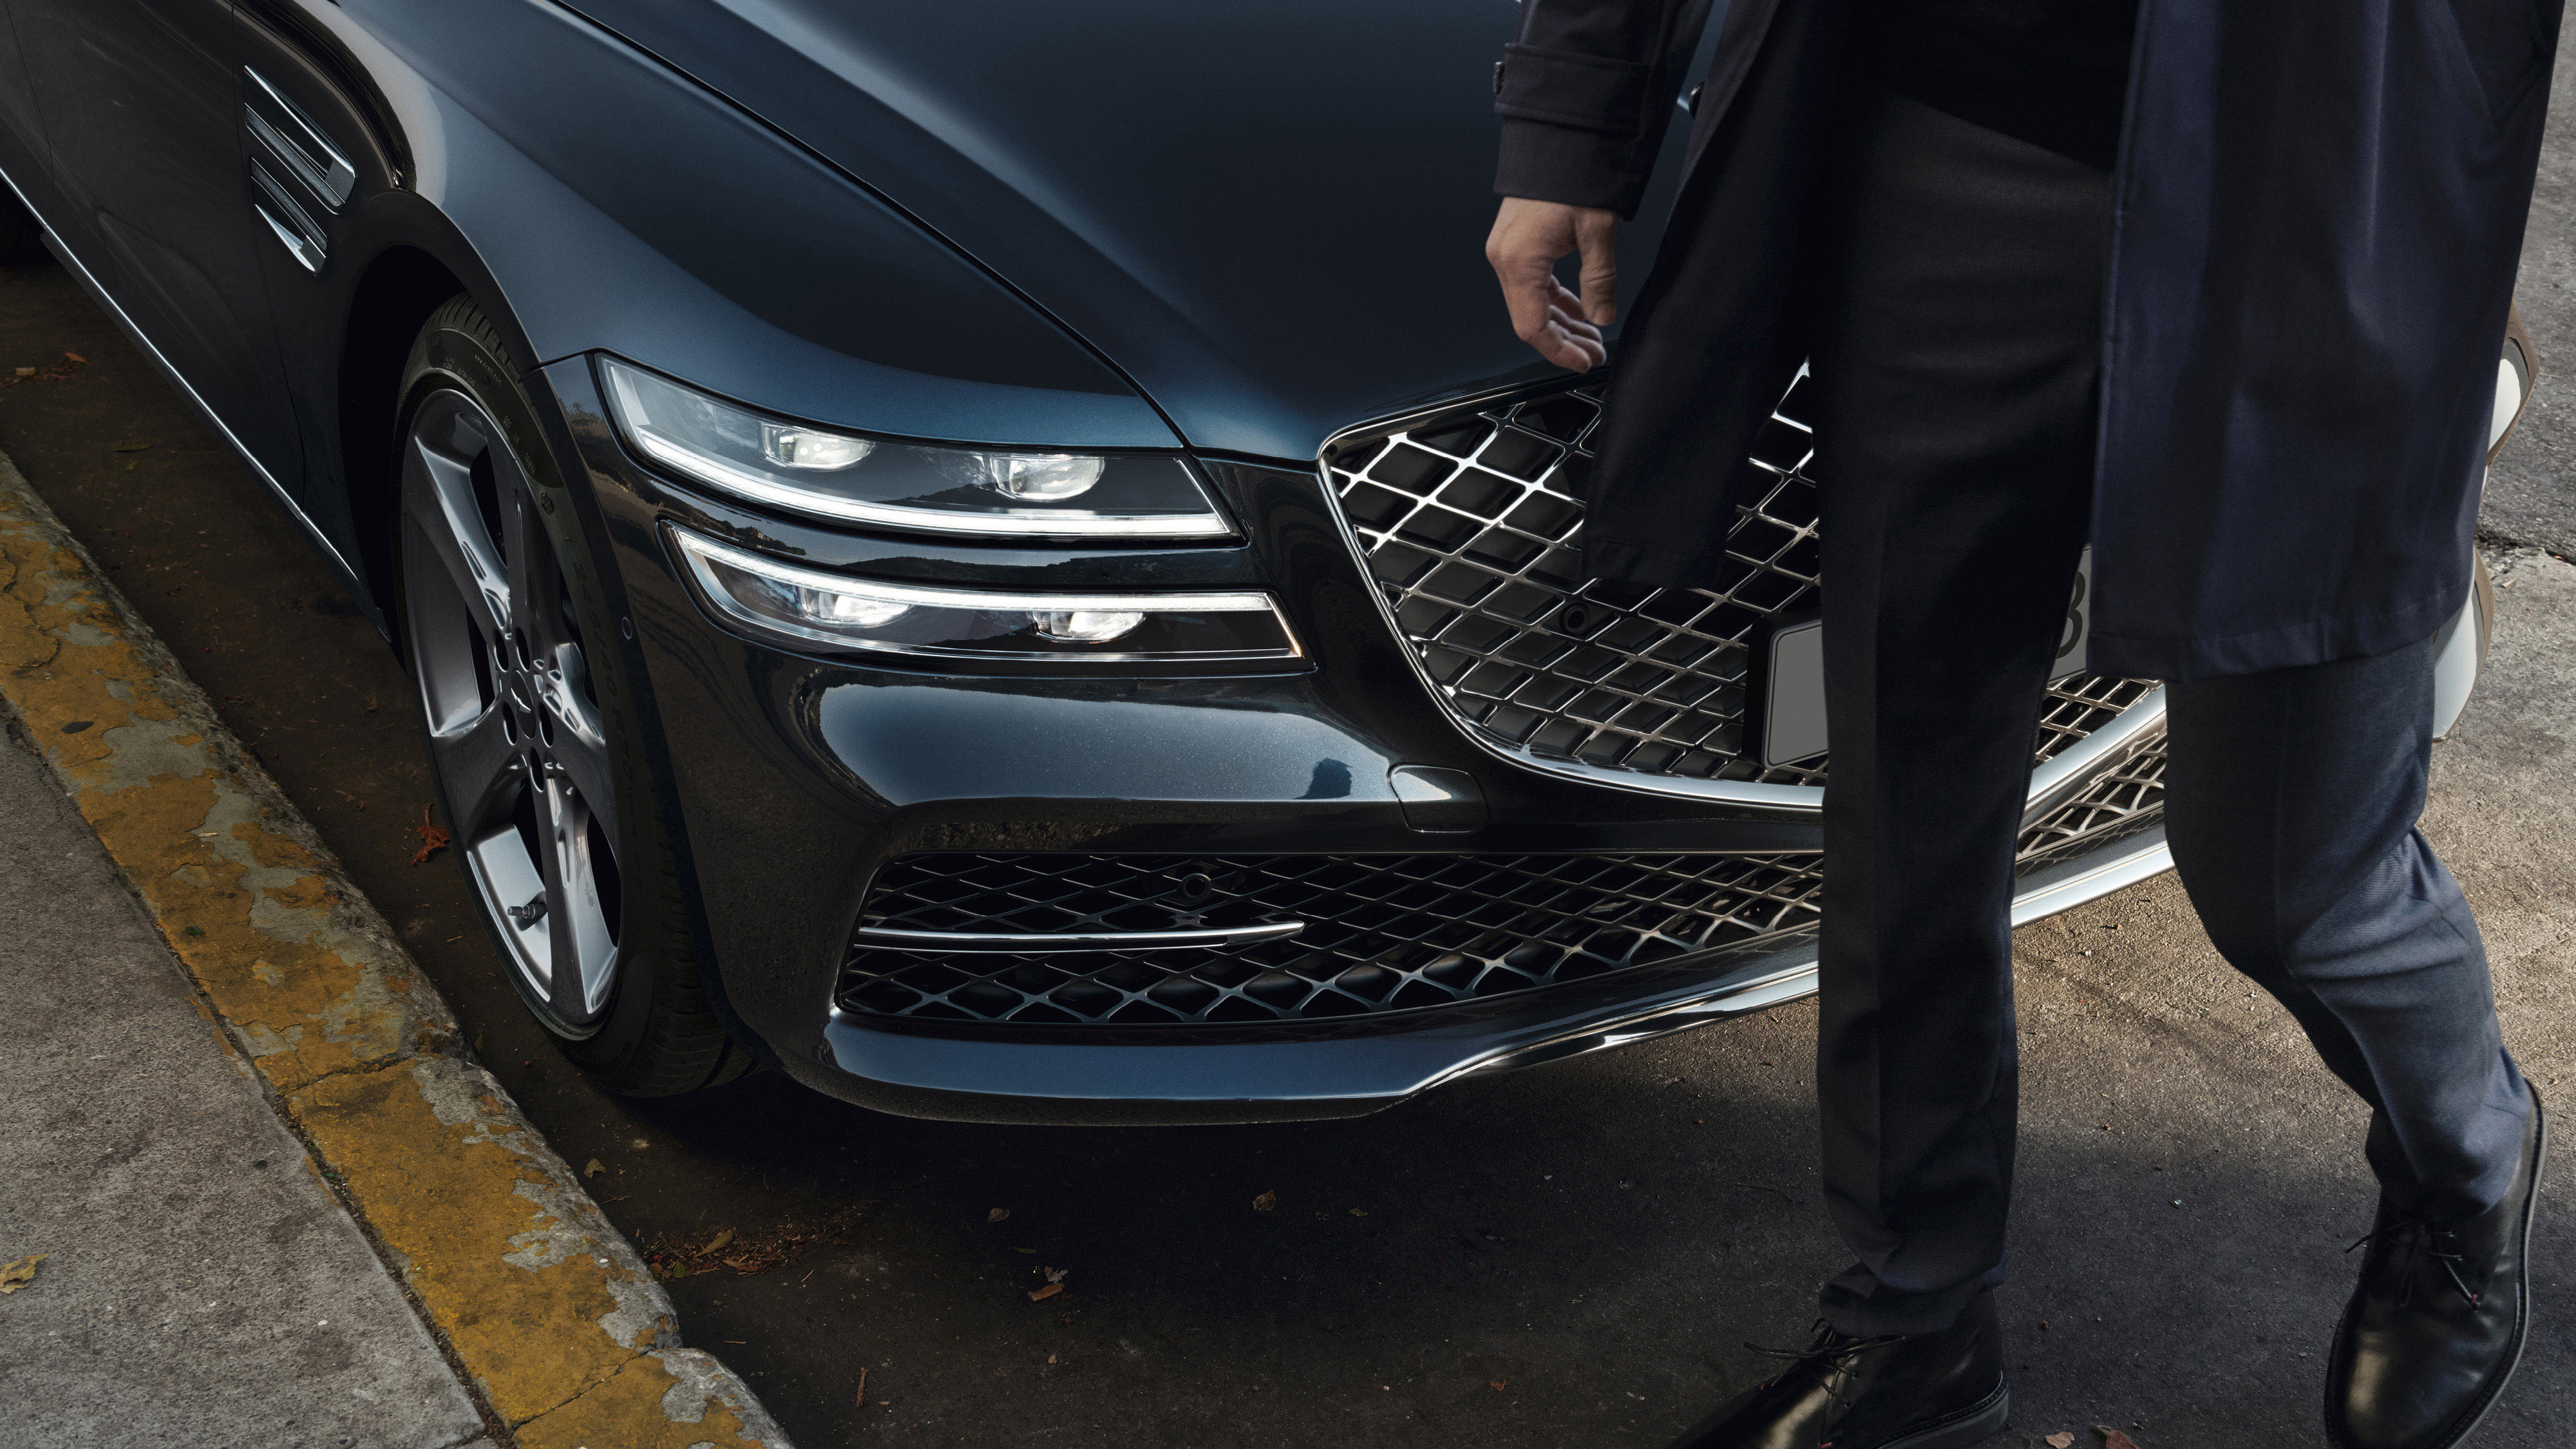 A pedestrian is passing in front of the Genesis G80